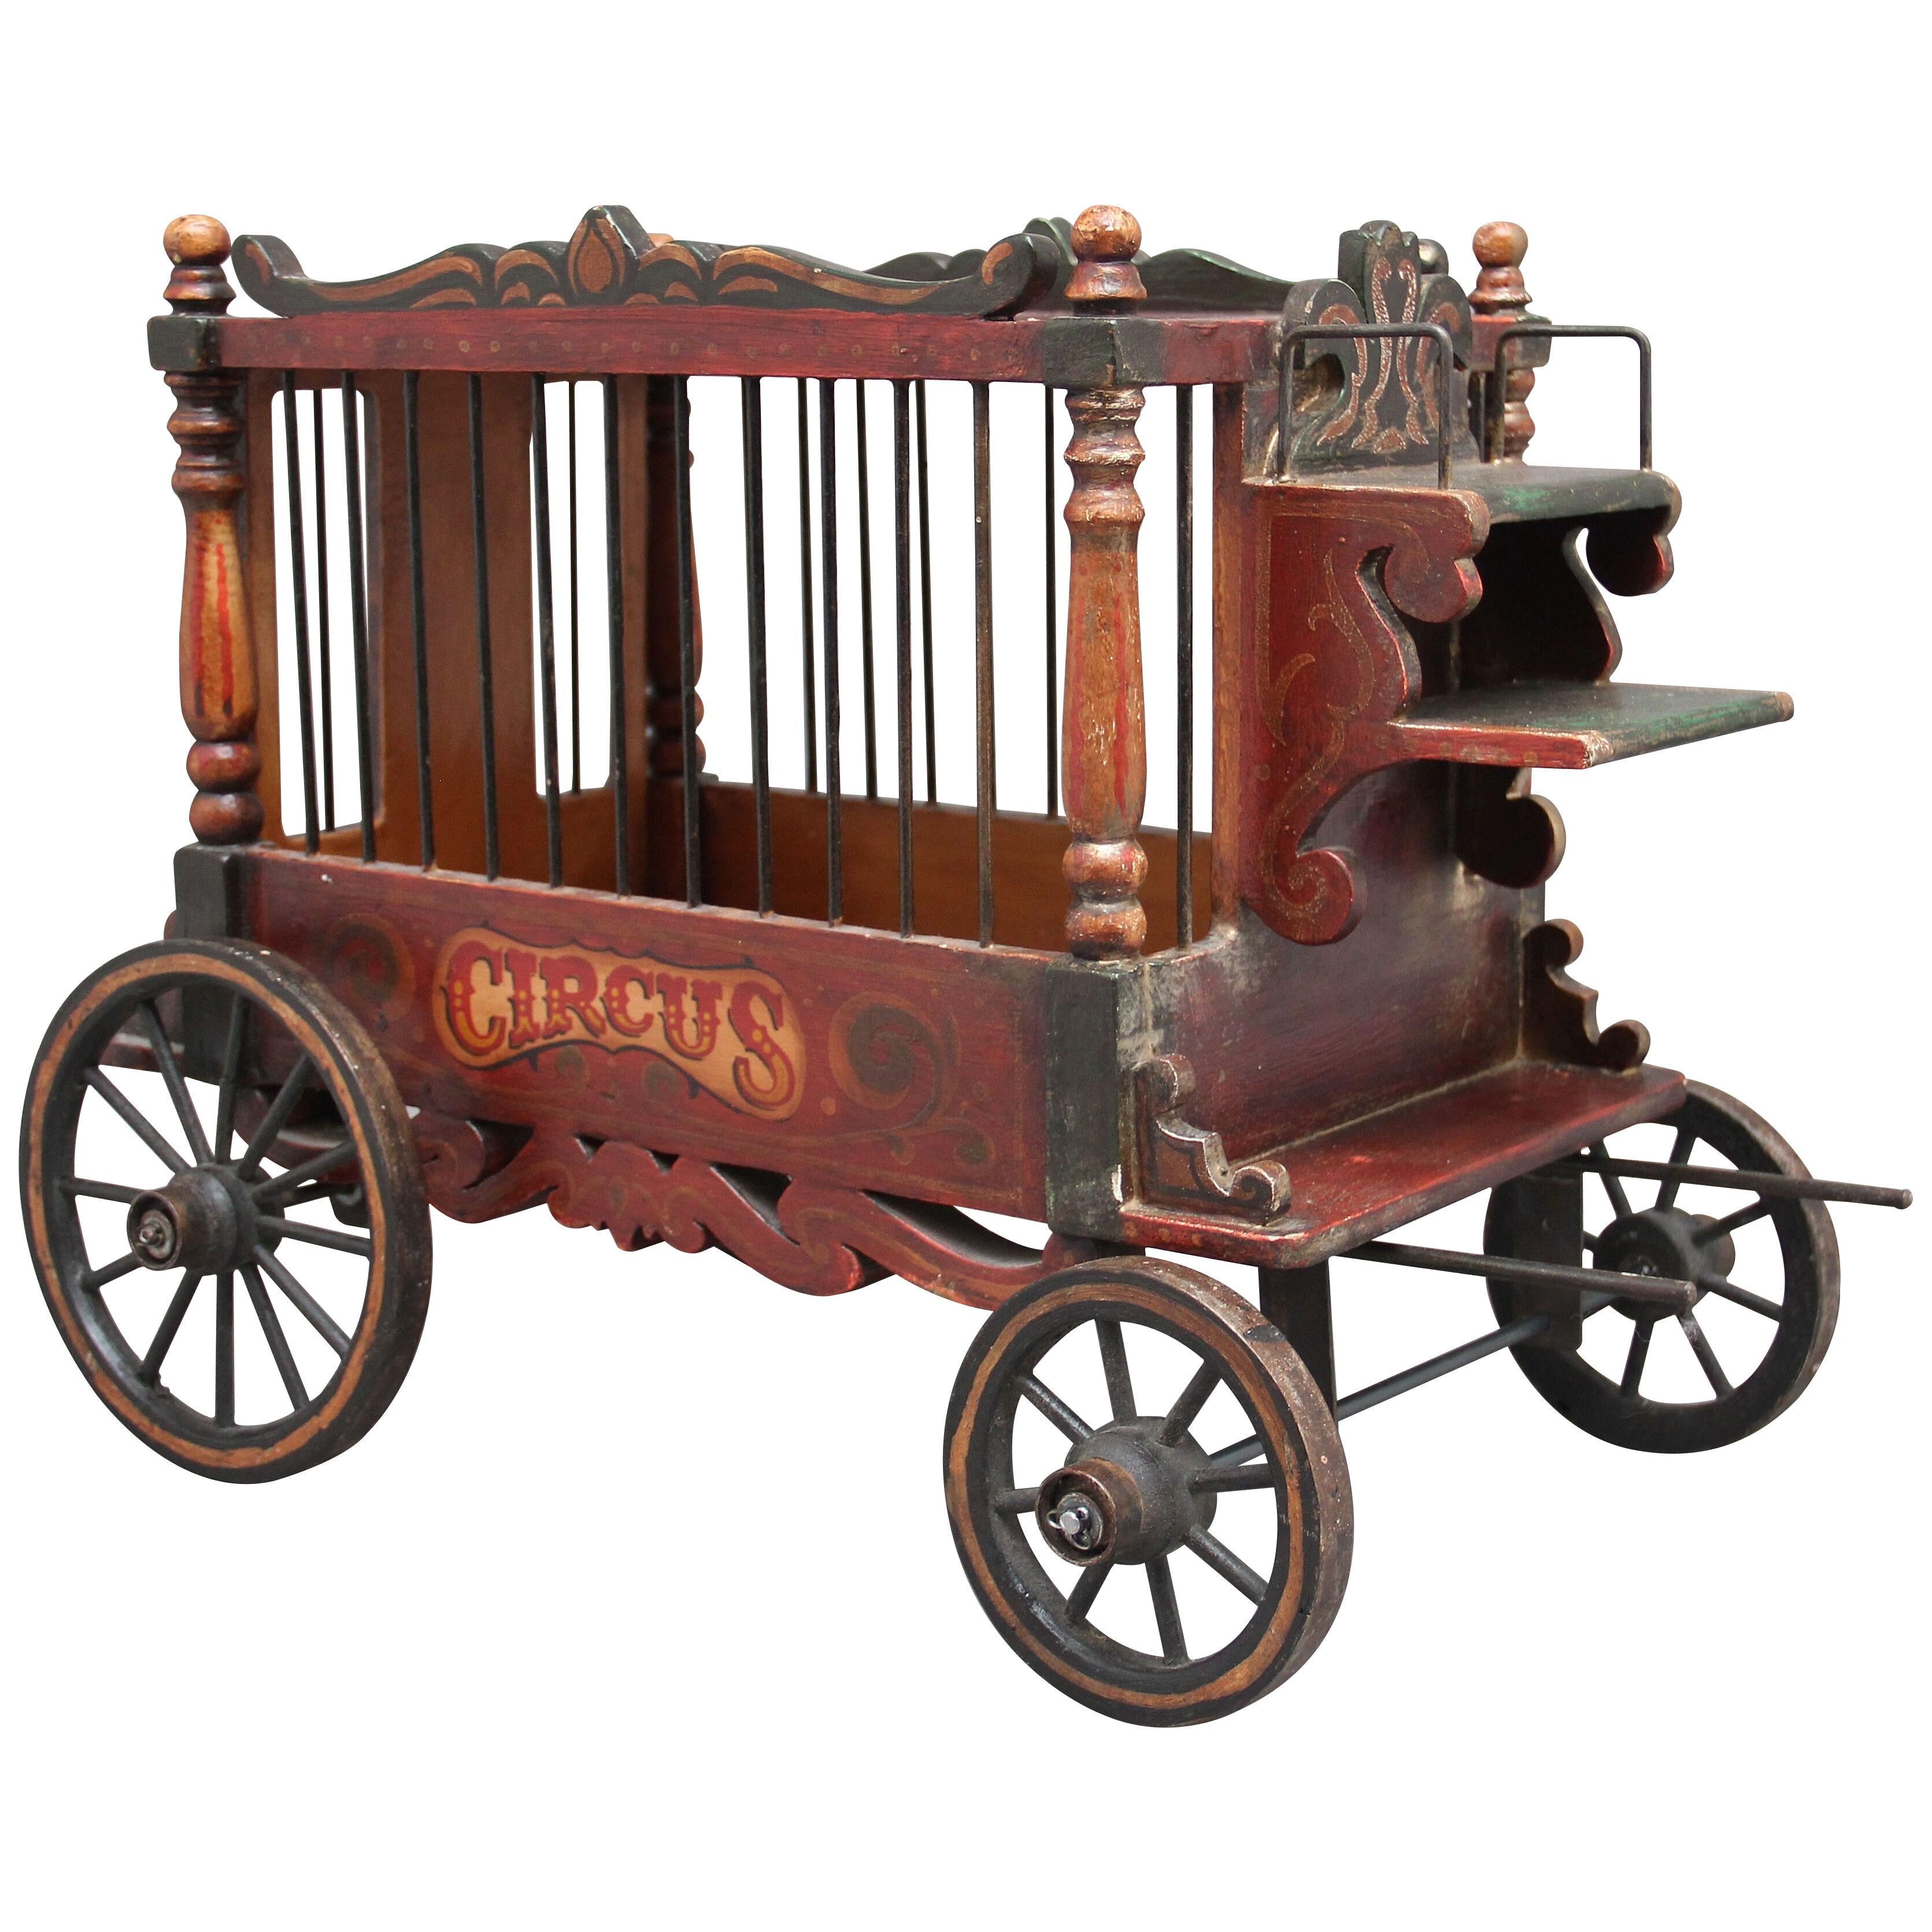 Early 20th Century model of a circus wagon